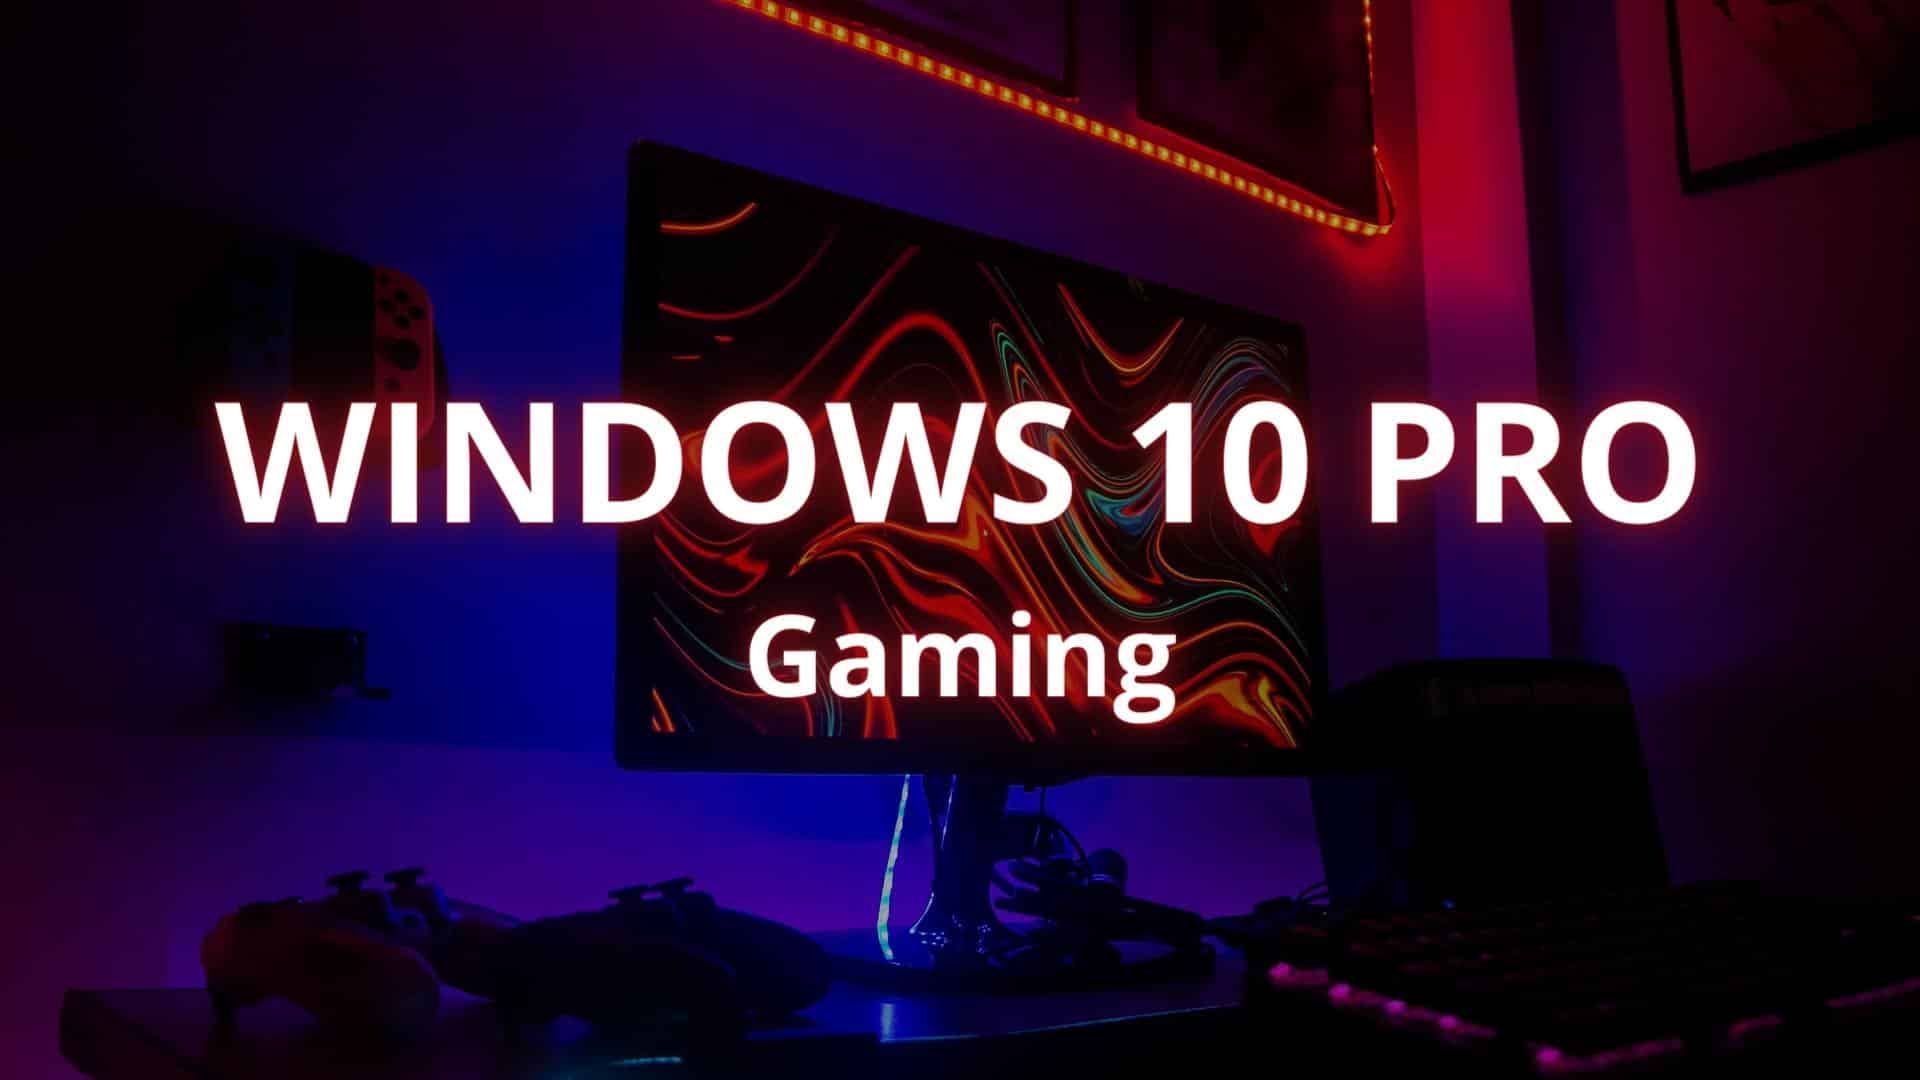 How to optimize Windows 10 Pro for Gaming?